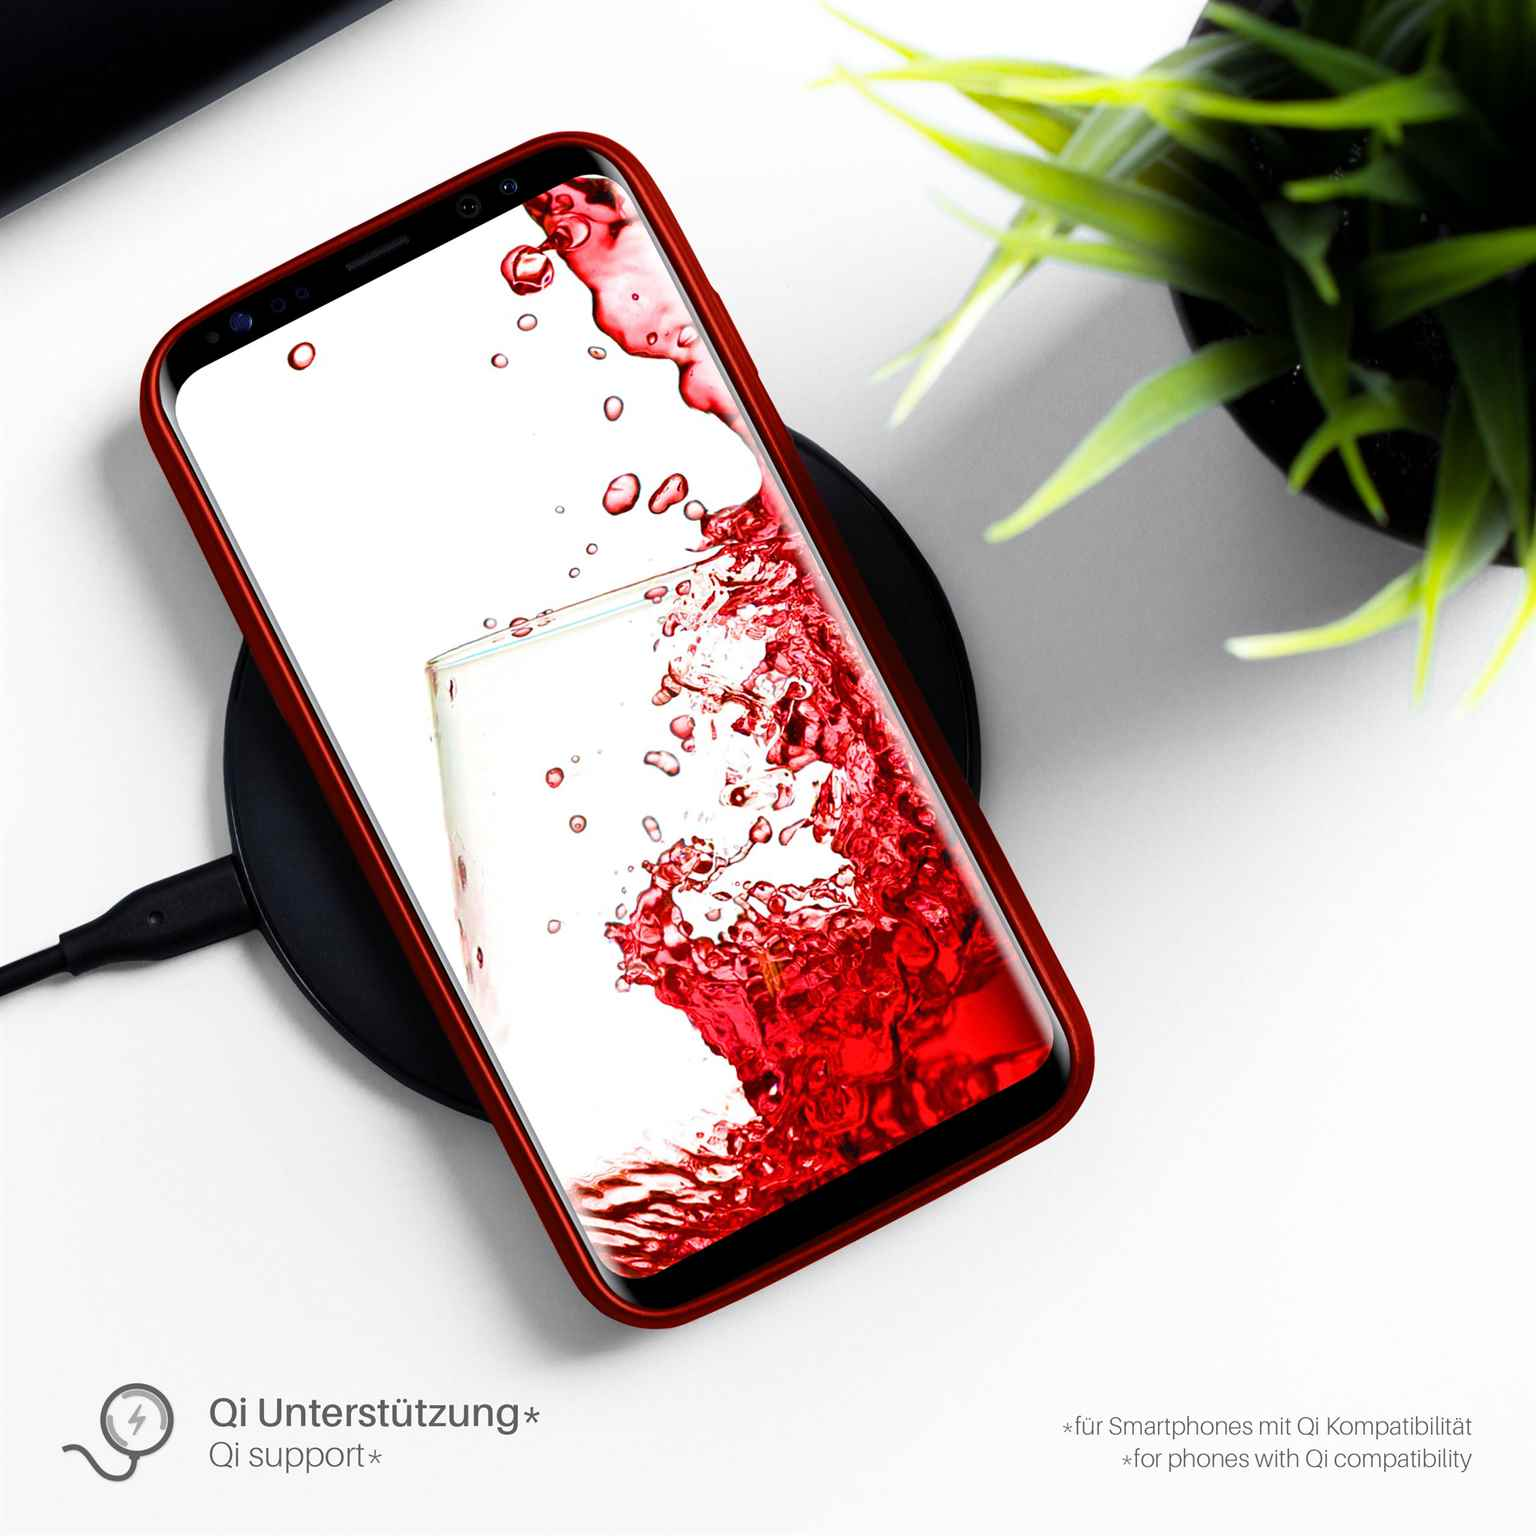 MOEX Brushed Case, Backcover, Galaxy S8, Samsung, Crimson-Red